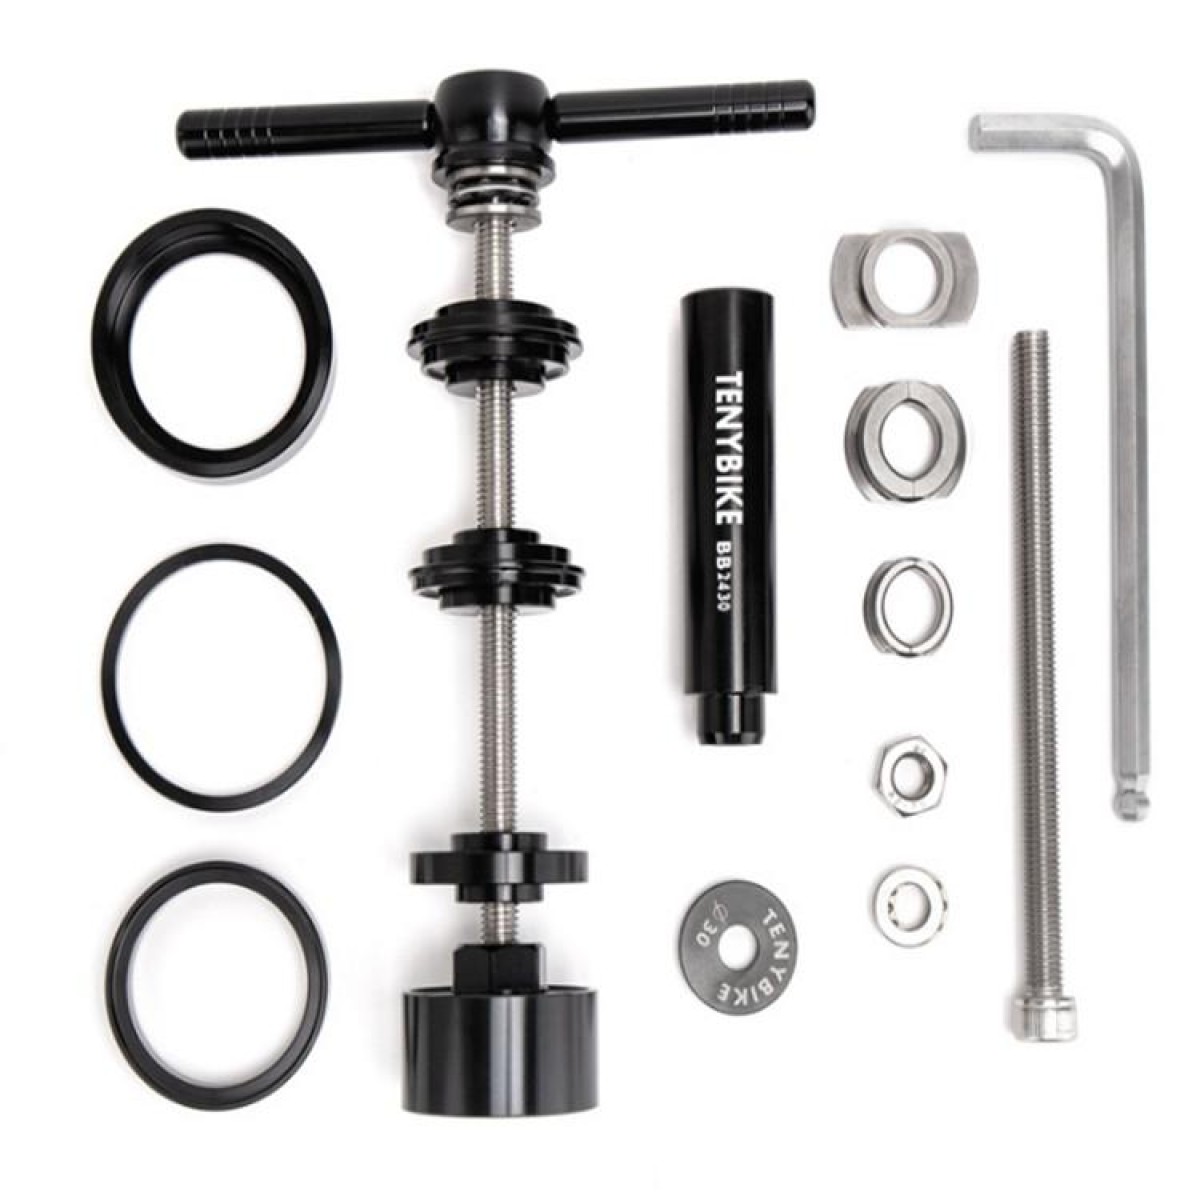 Static Installation And Disassembly Tool Set For Bicycle Press-in Bottom Bracket For BB86/30/92/PF30 Bottom Bracket